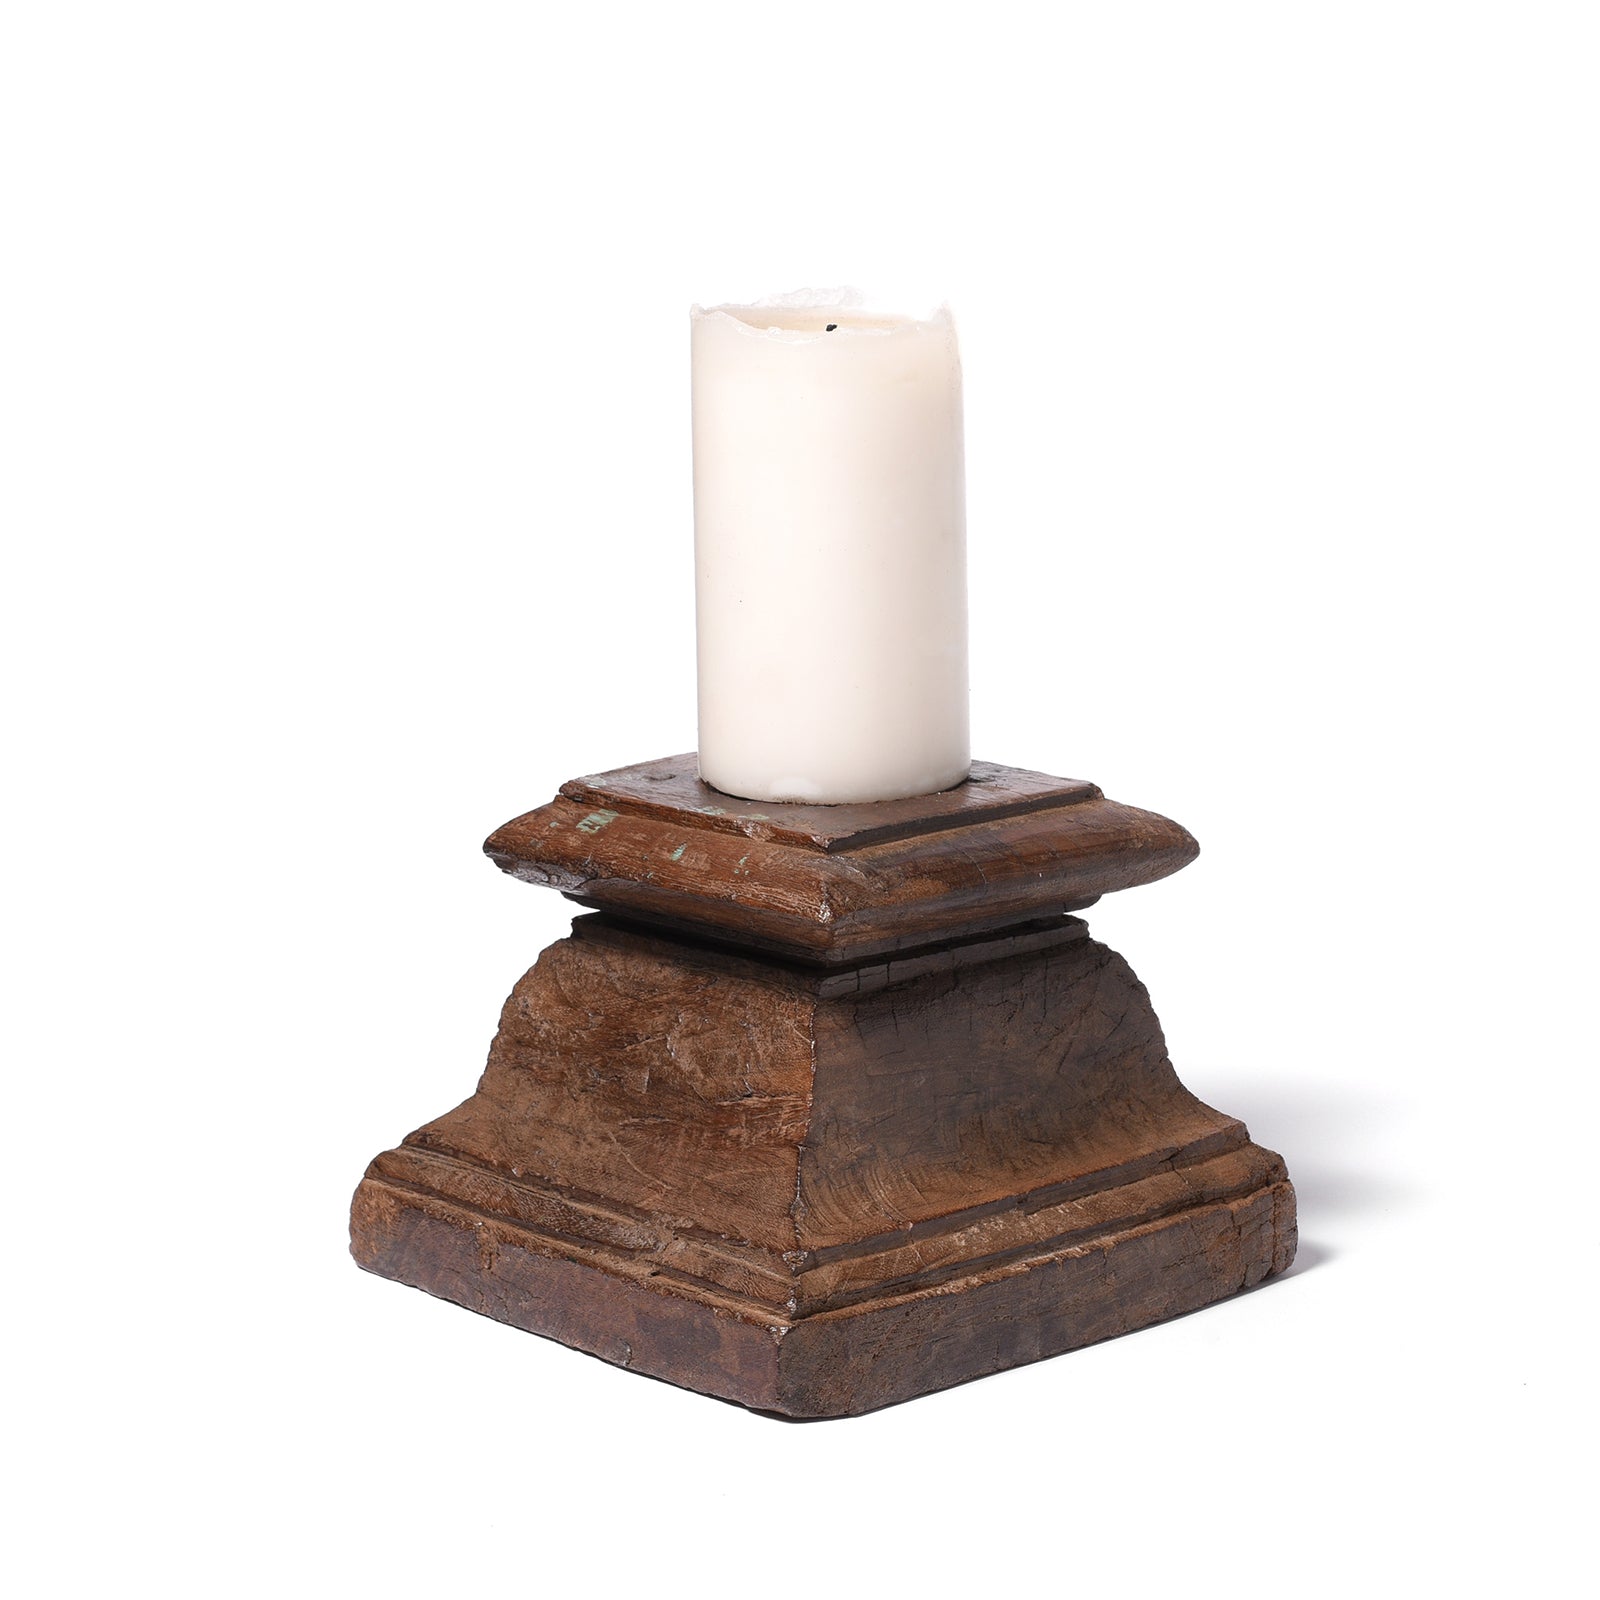 Antique Teak Wood Candle Holder From Old Capitol | Indigo Antiques